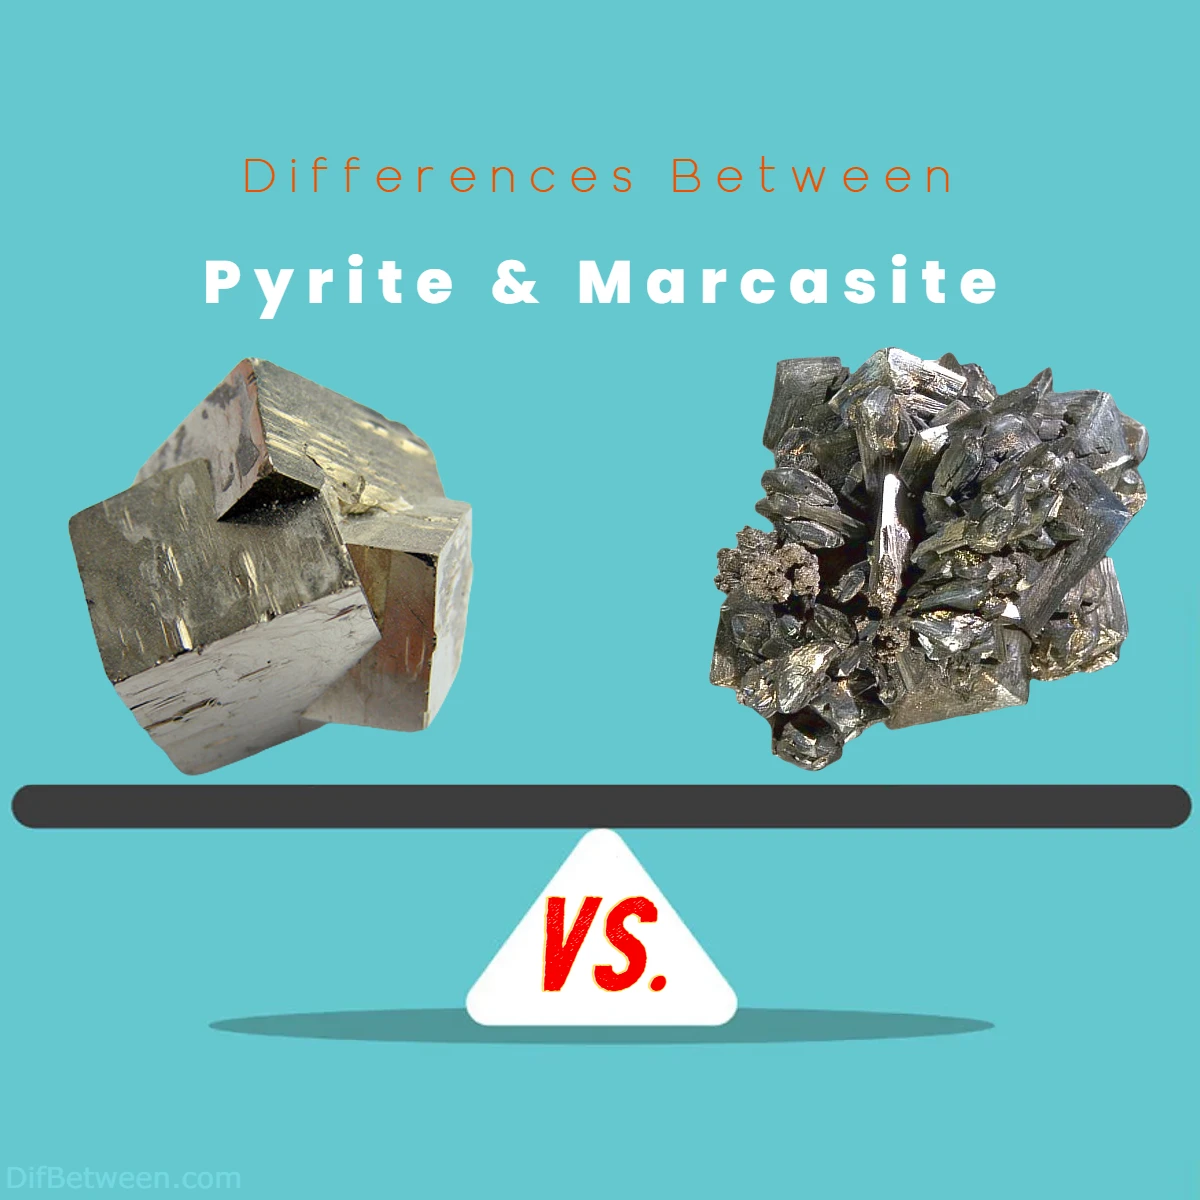 Differences Between Pyrite vs Marcasite